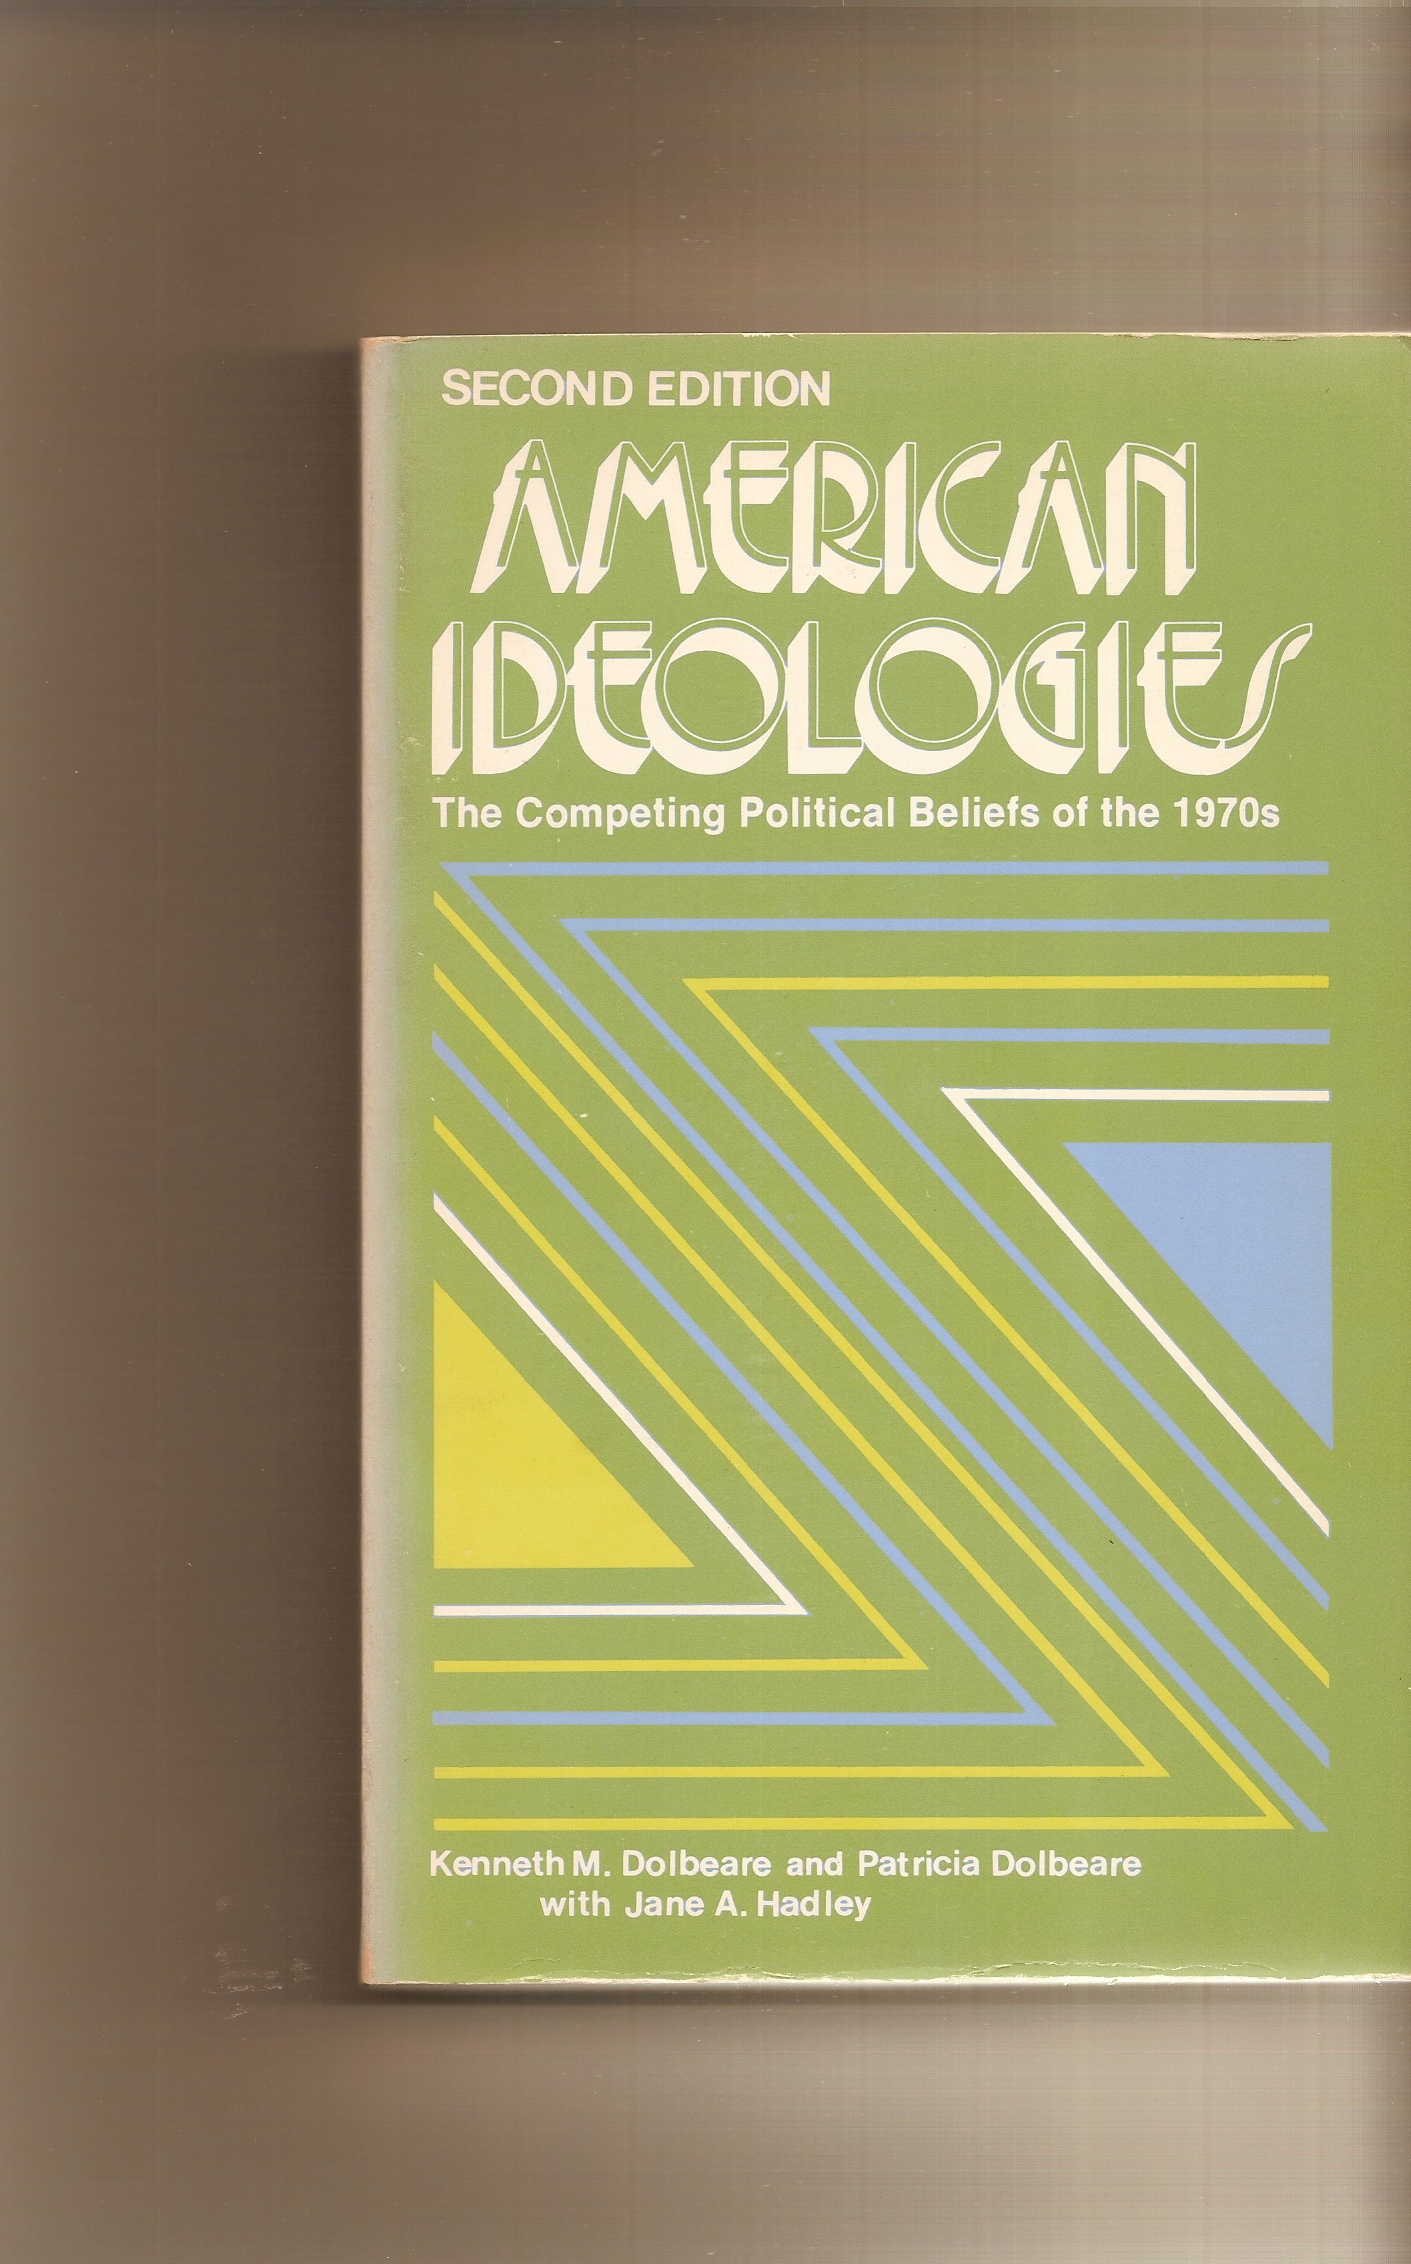 DOLBEARE, KENNETH M - Readings in American Ideologies the Competing Political Beliefs of the 1970s